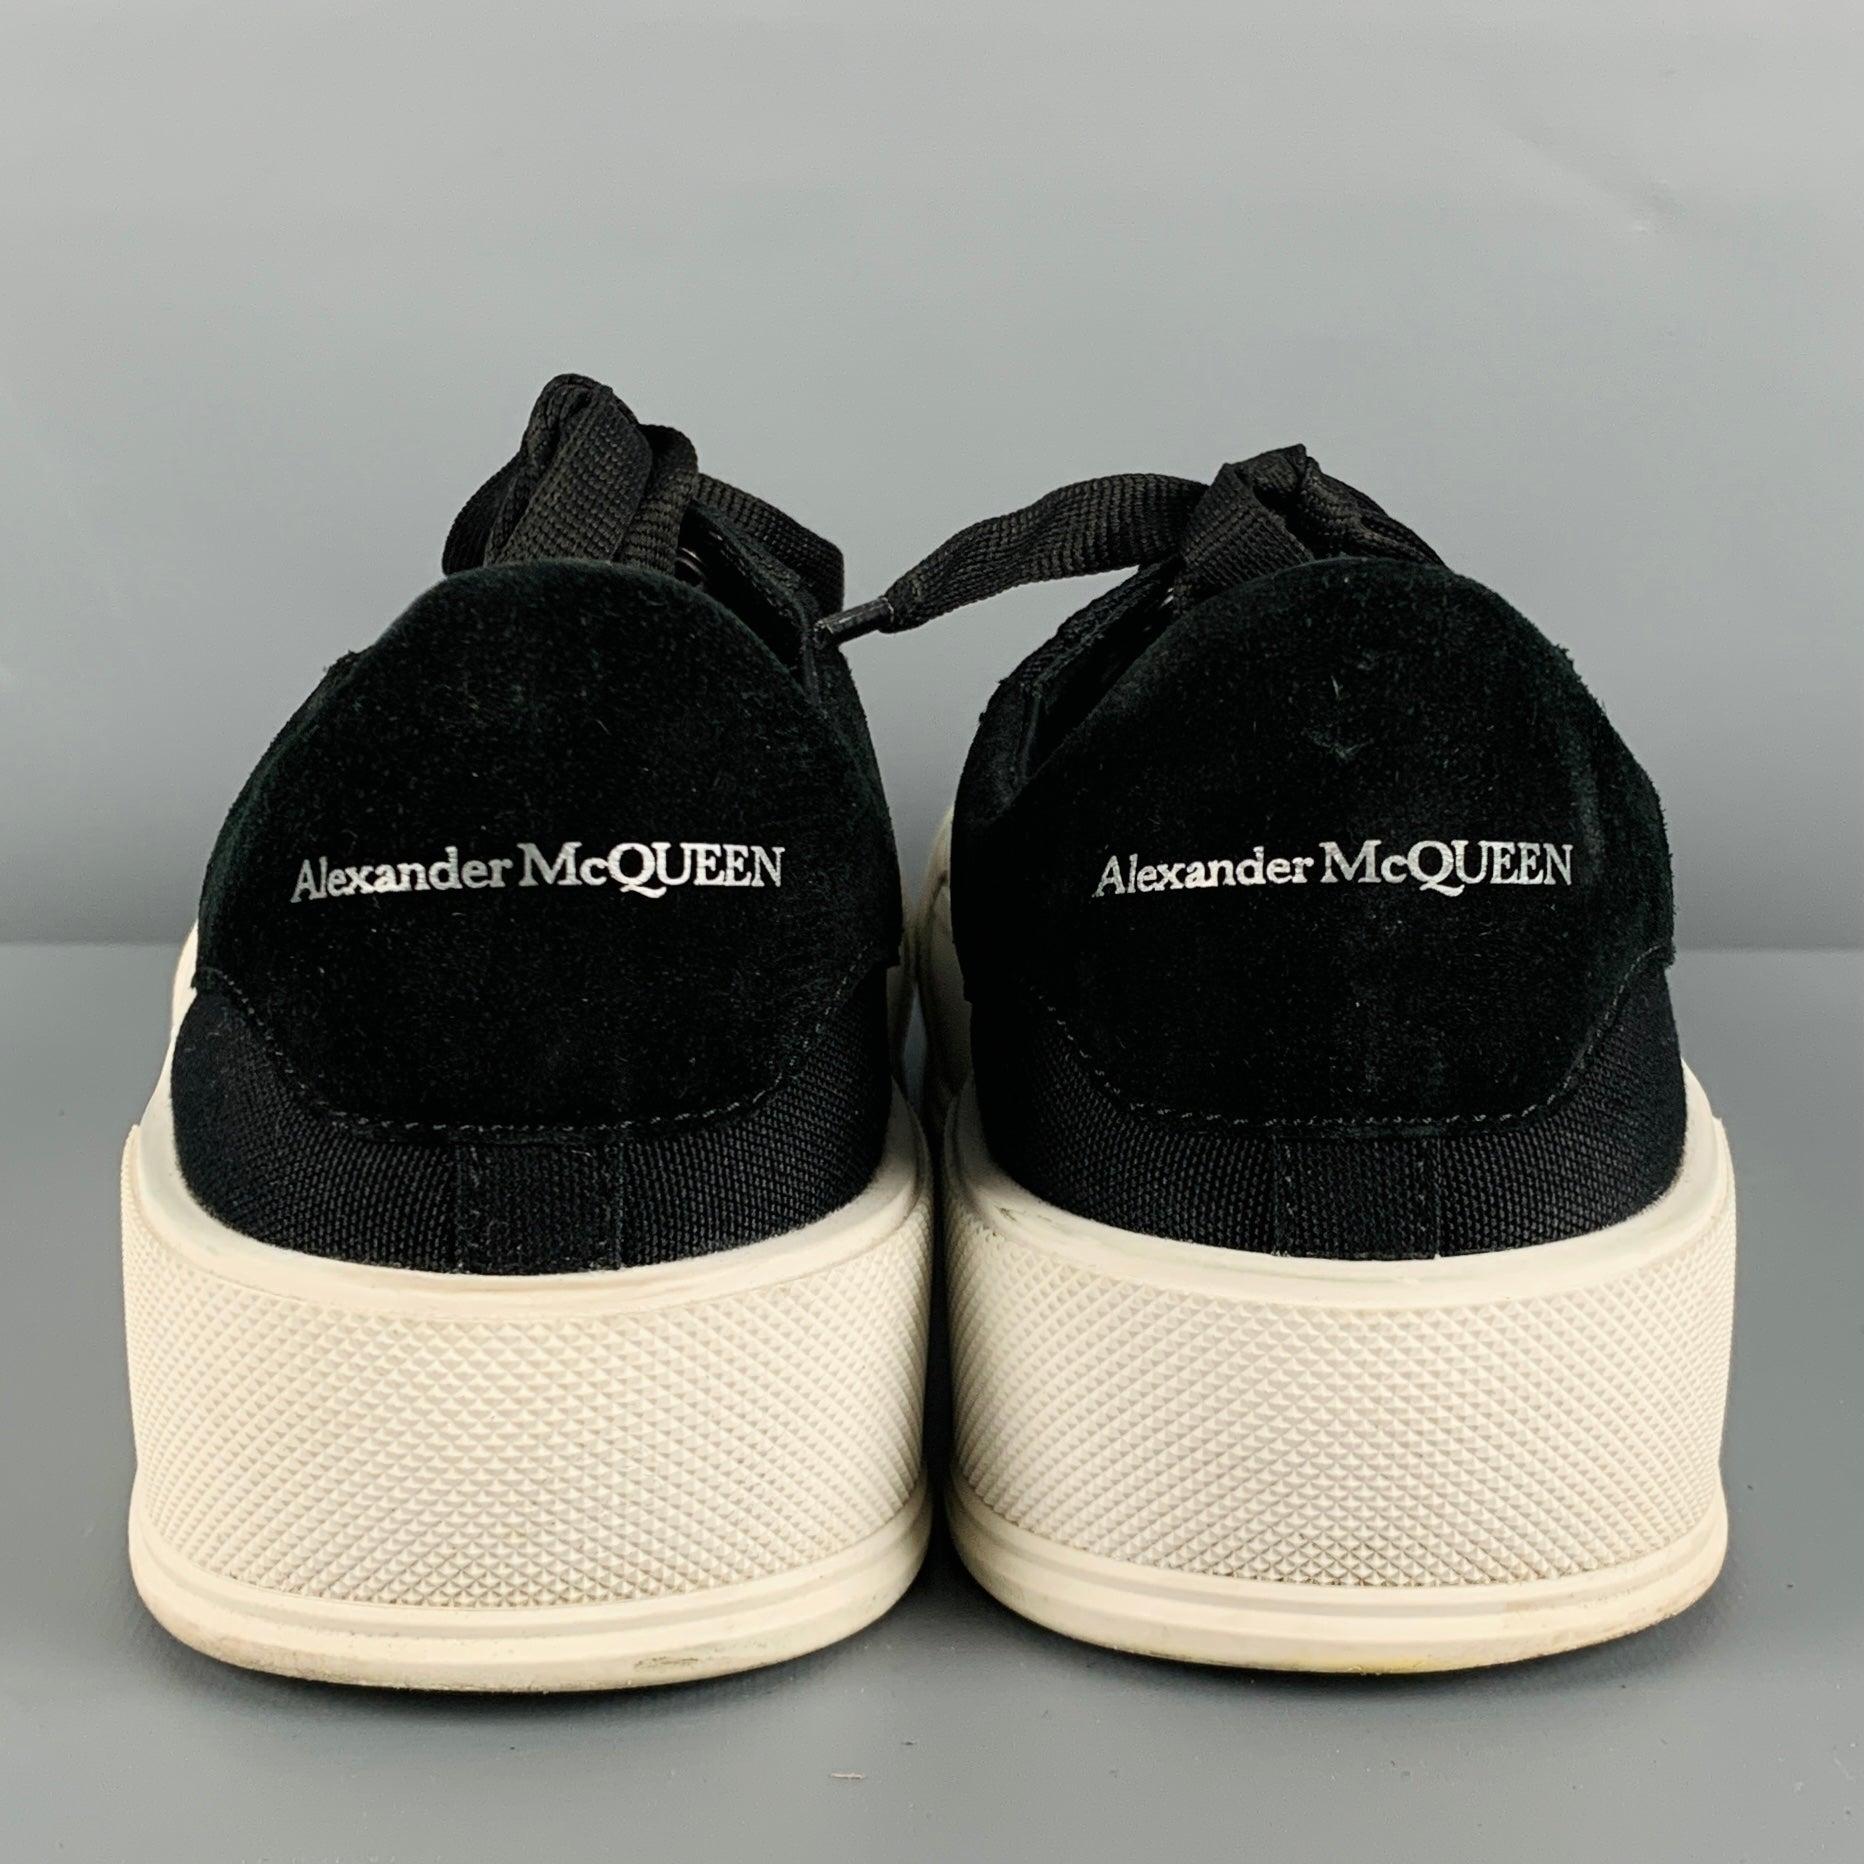 ALEXANDER MCQUEEN Size 10 Black White Two Toned Canvas Lace-Up Sneakers In Good Condition For Sale In San Francisco, CA